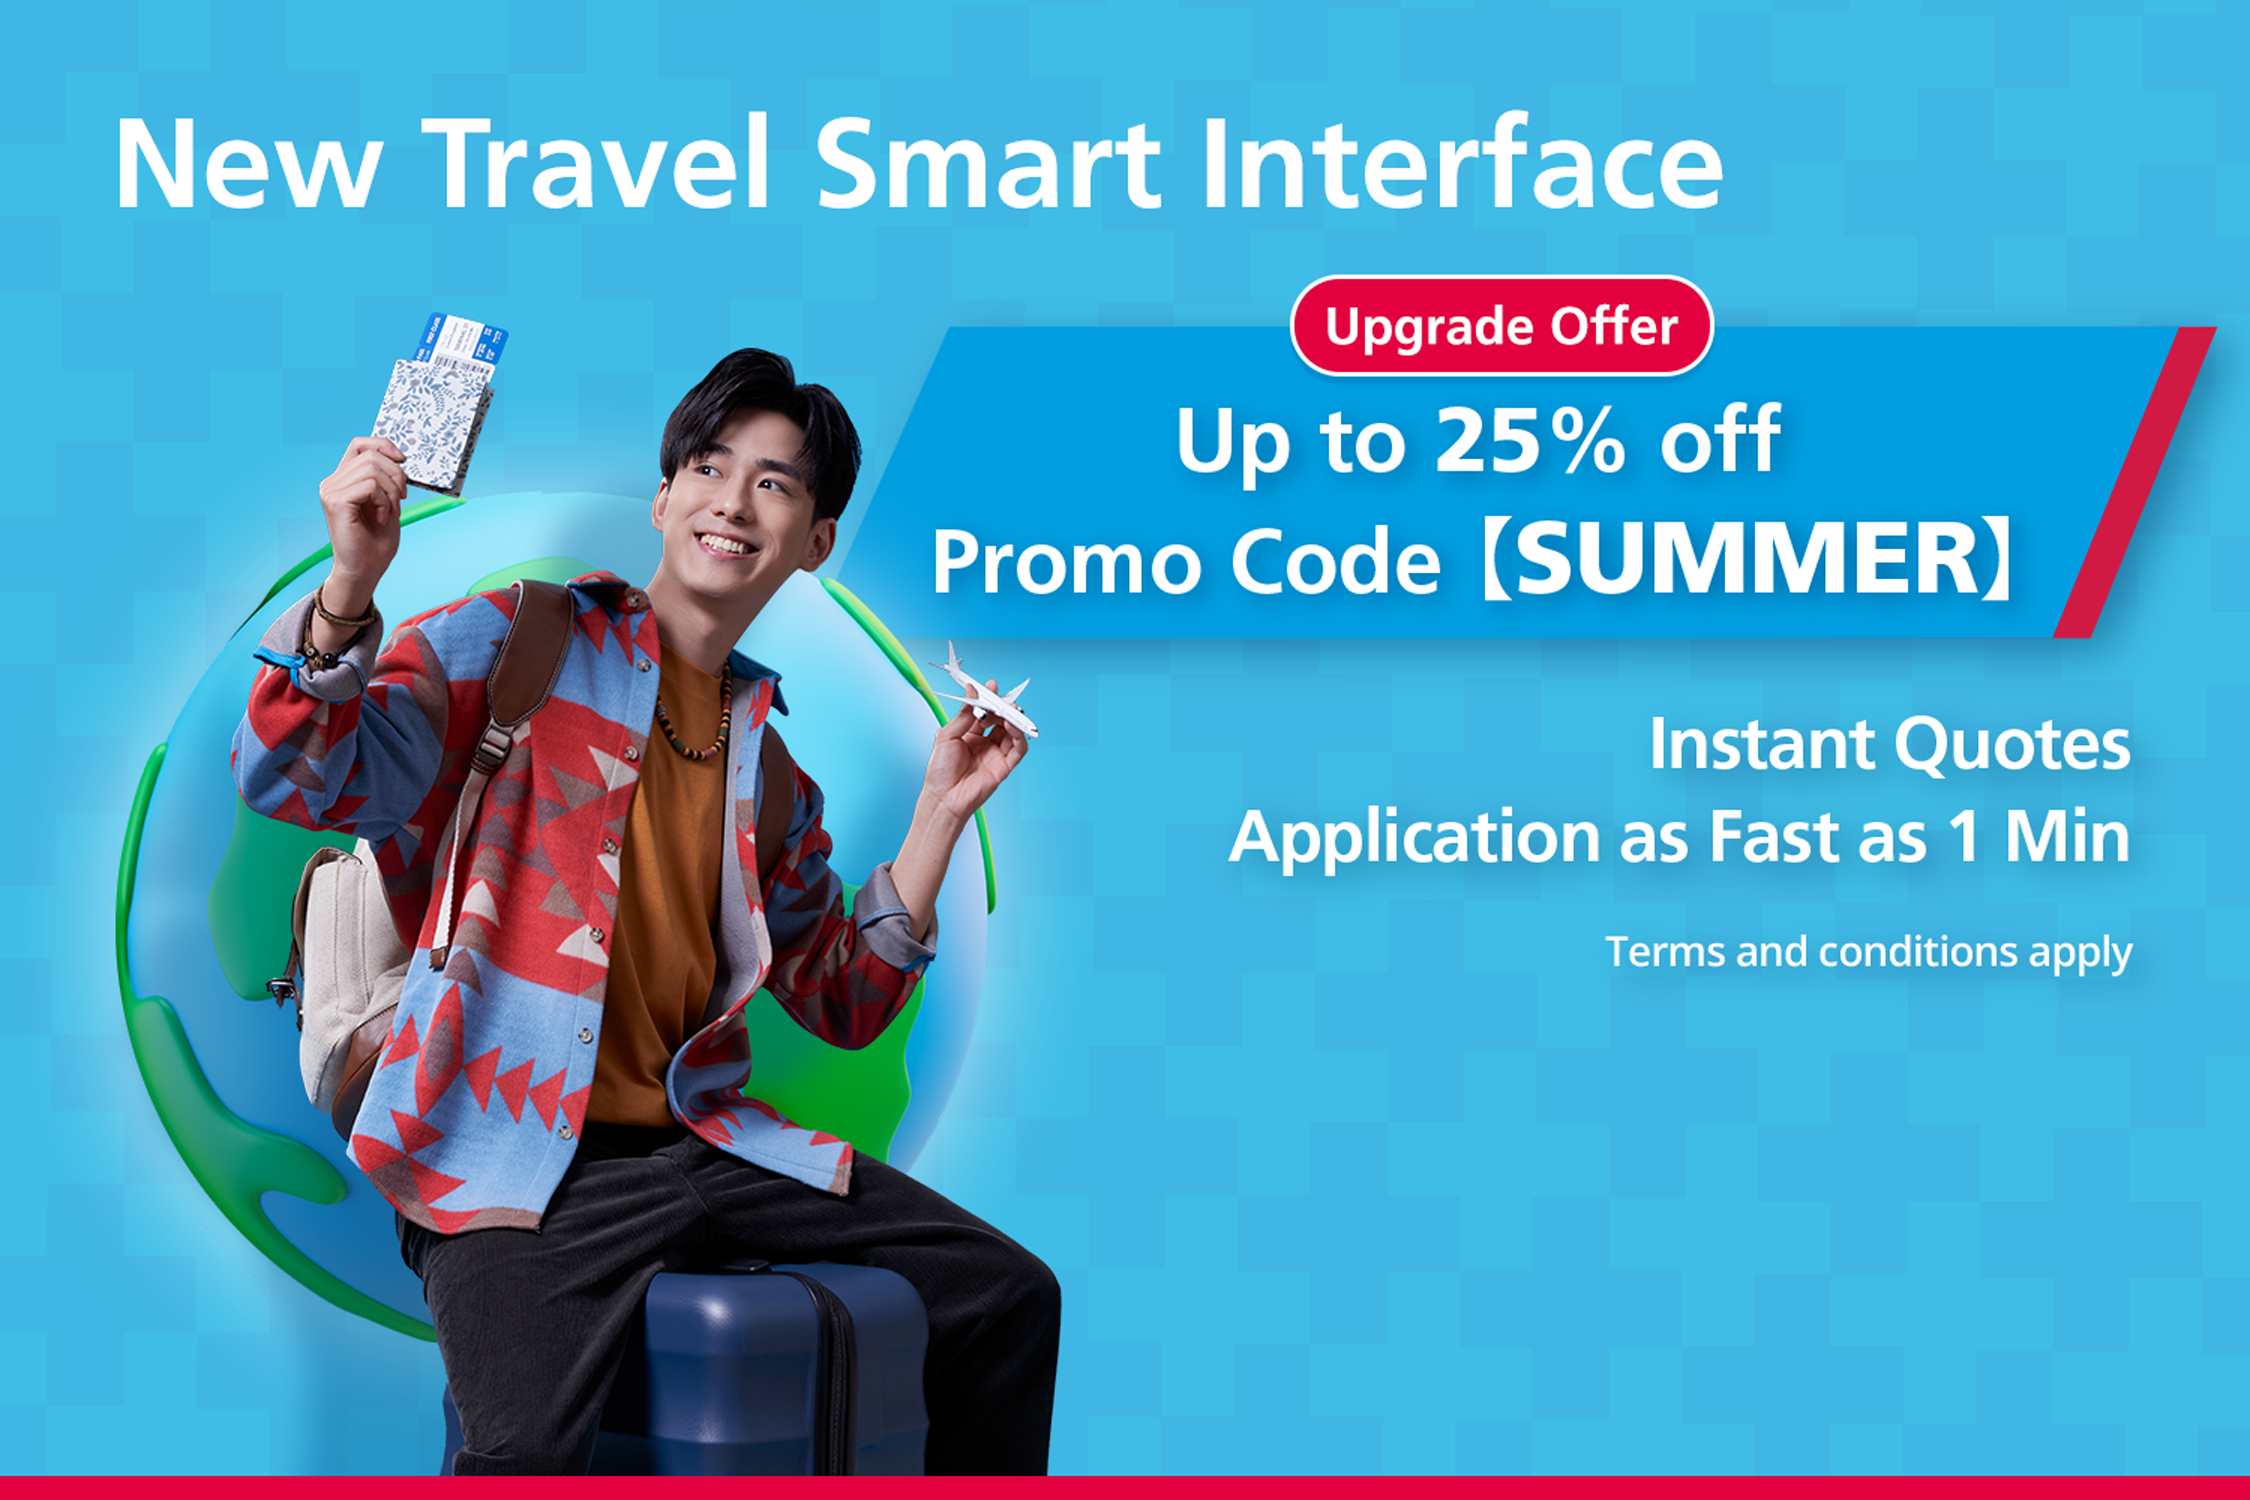 With a range of distinctive plans and comprehensive coverage, Travel Smart is your best travel companion.